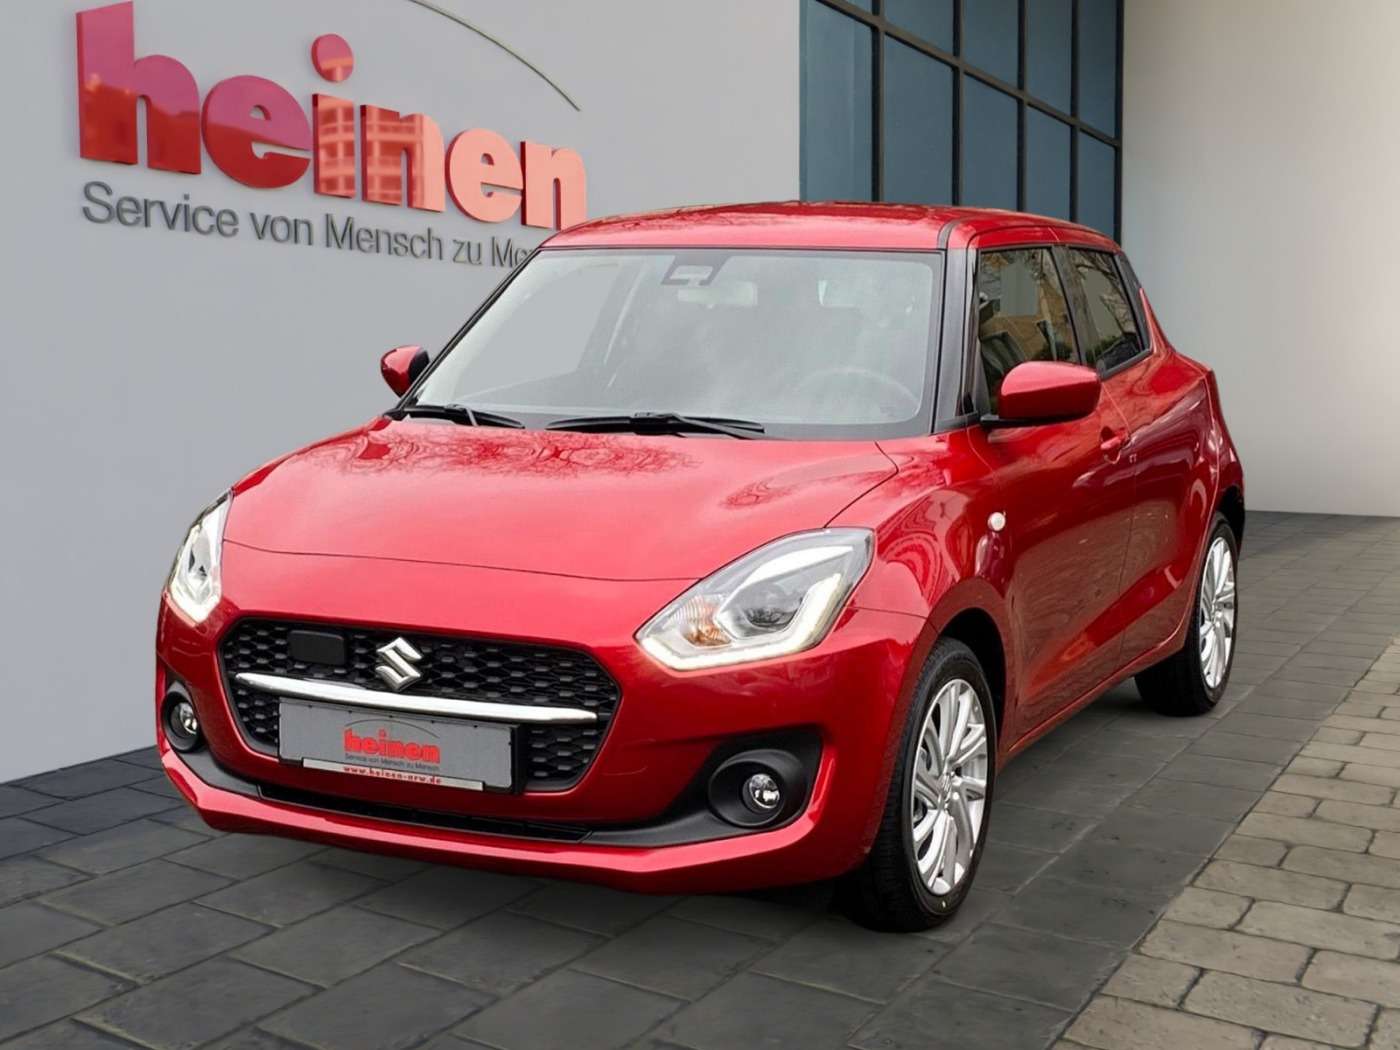 Suzuki Swift Compact in Red new in Holzwickede for € 15,580.-